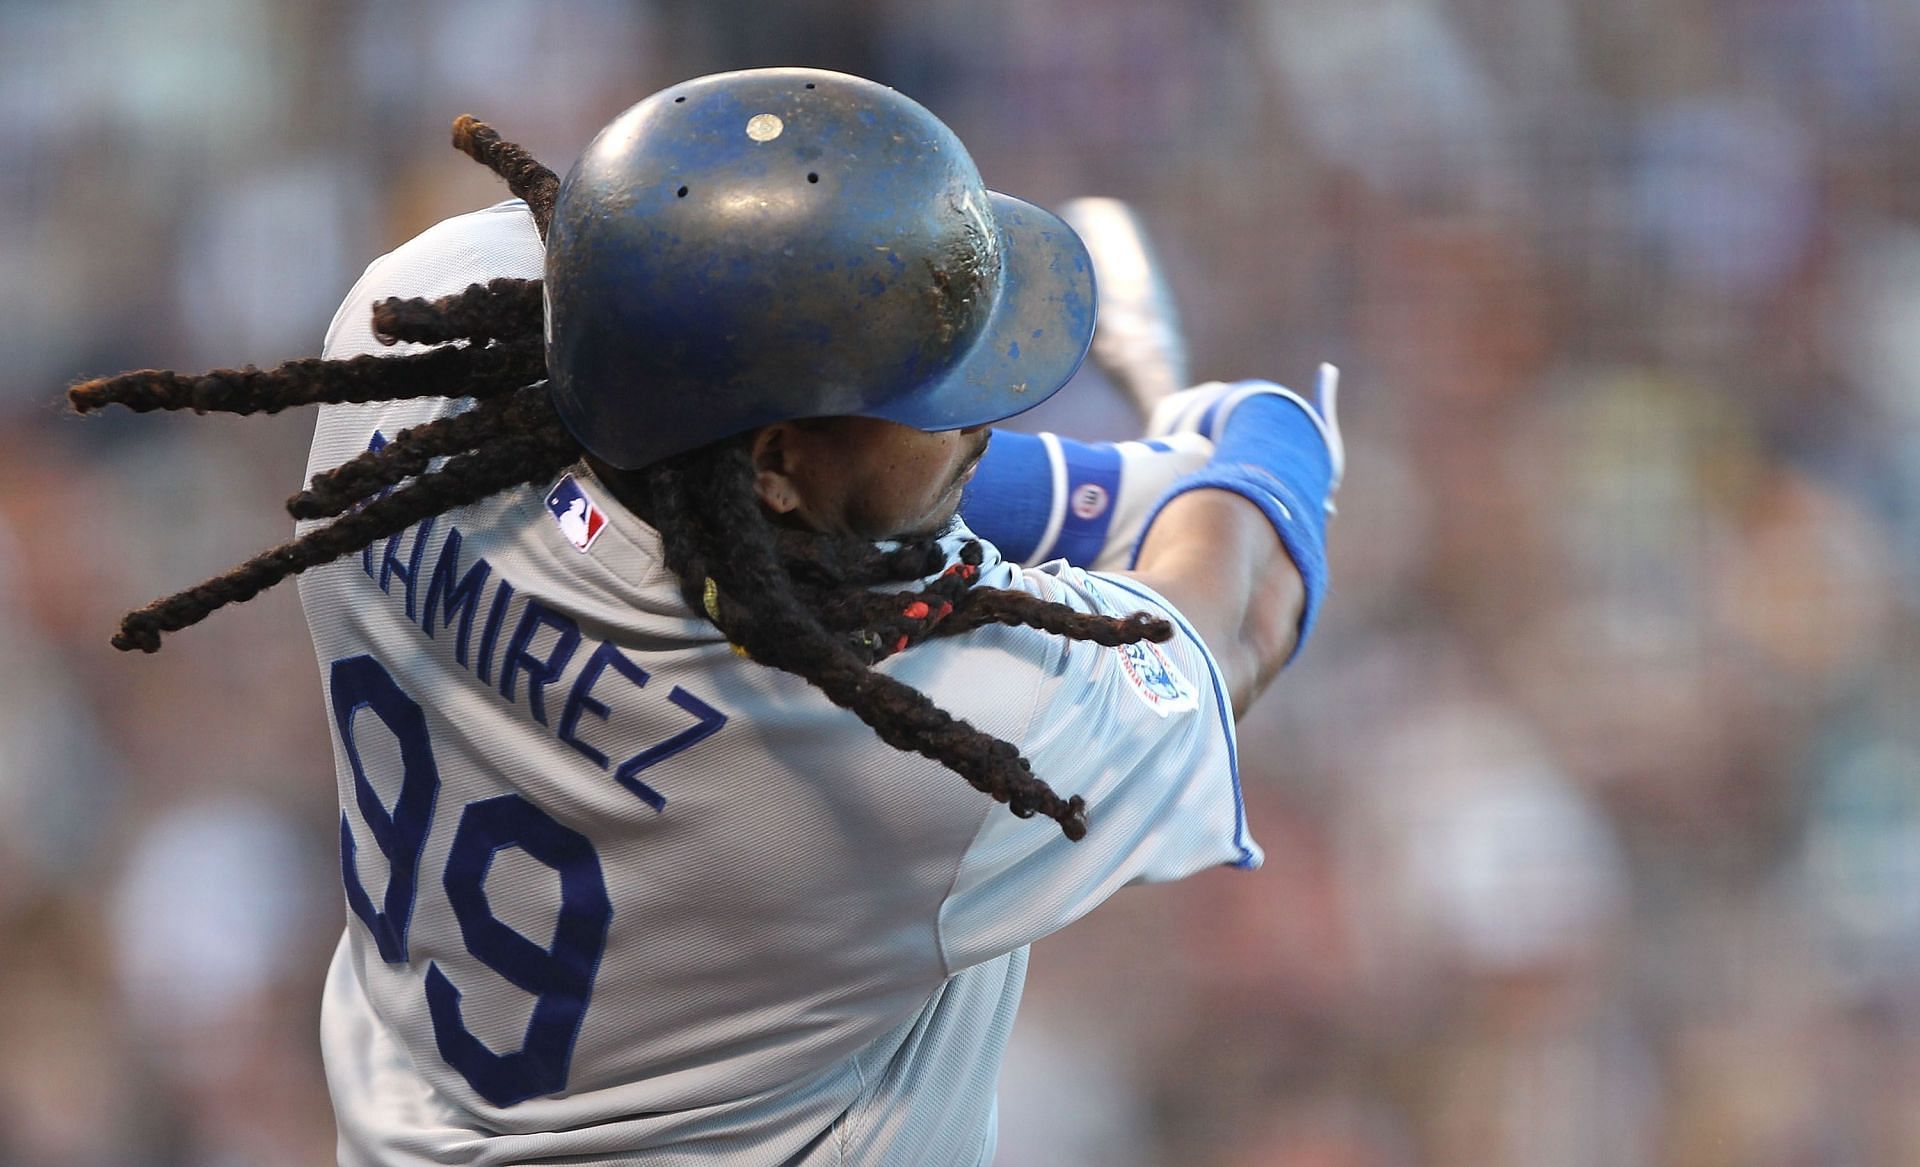 Manny Ramirez Controversy and the 8 Biggest Surprises in MLB This